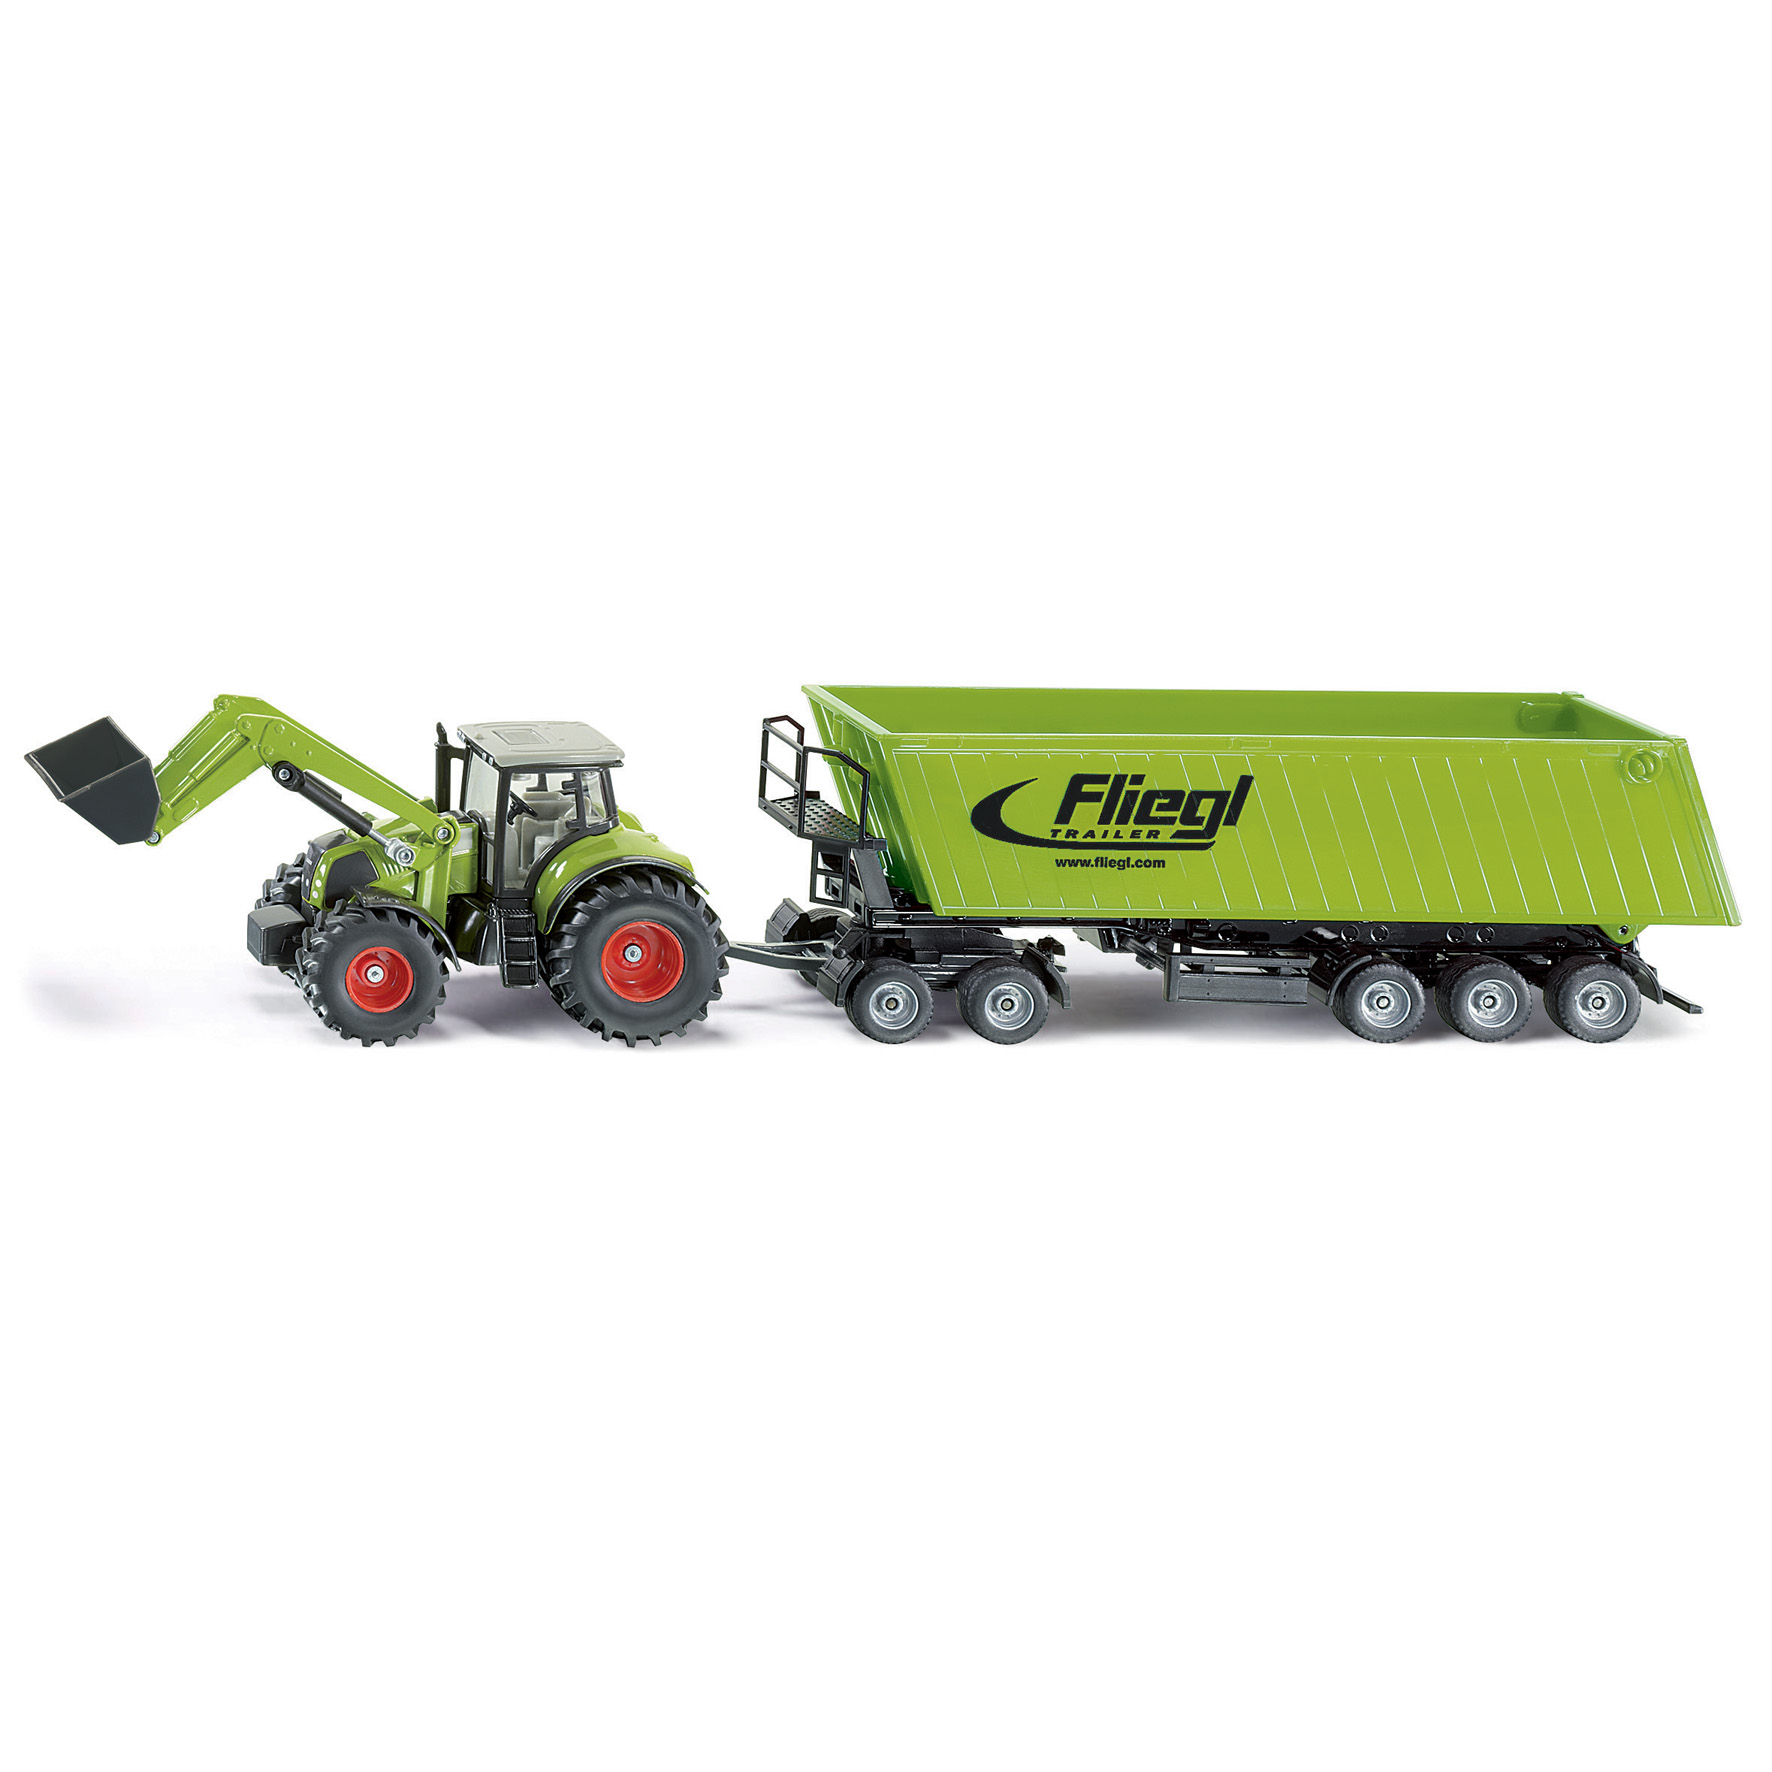 Siku siku tractor front with dolly & tip 1:50